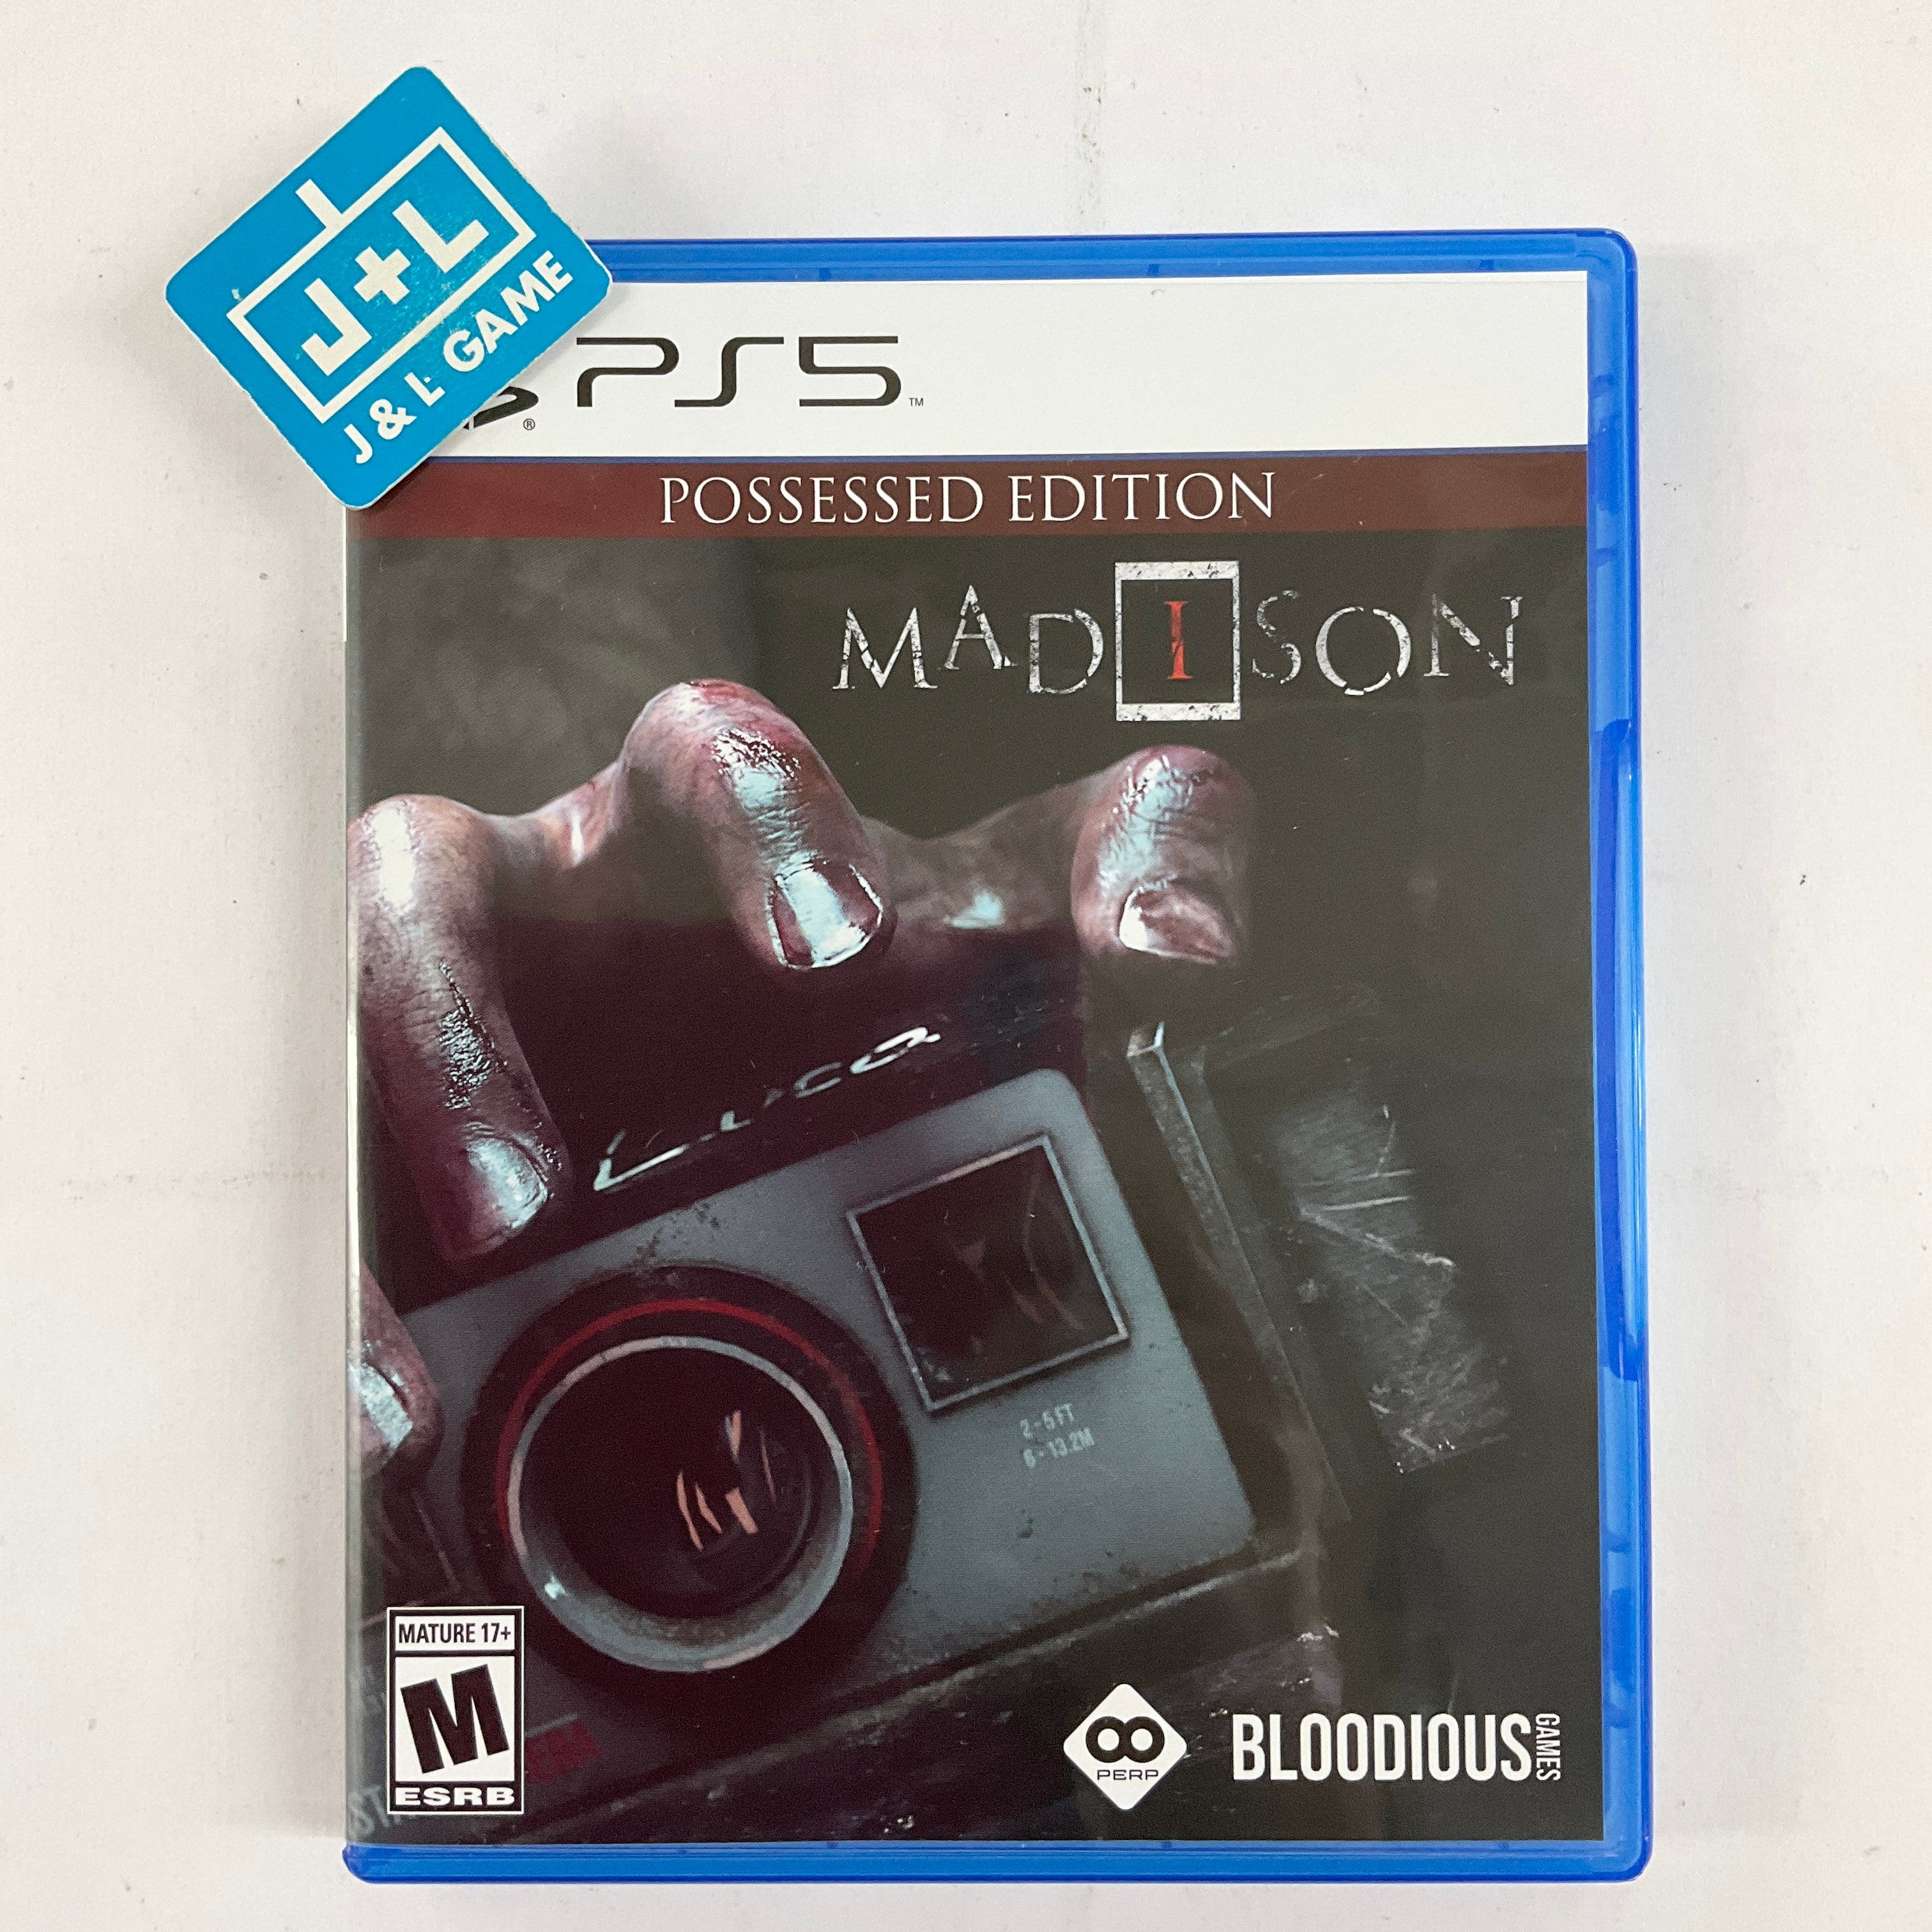 MADiSON (Possessed Edition) - (PS5) PlayStation 5 [UNBOXING] Video Games U&I Entertainment   